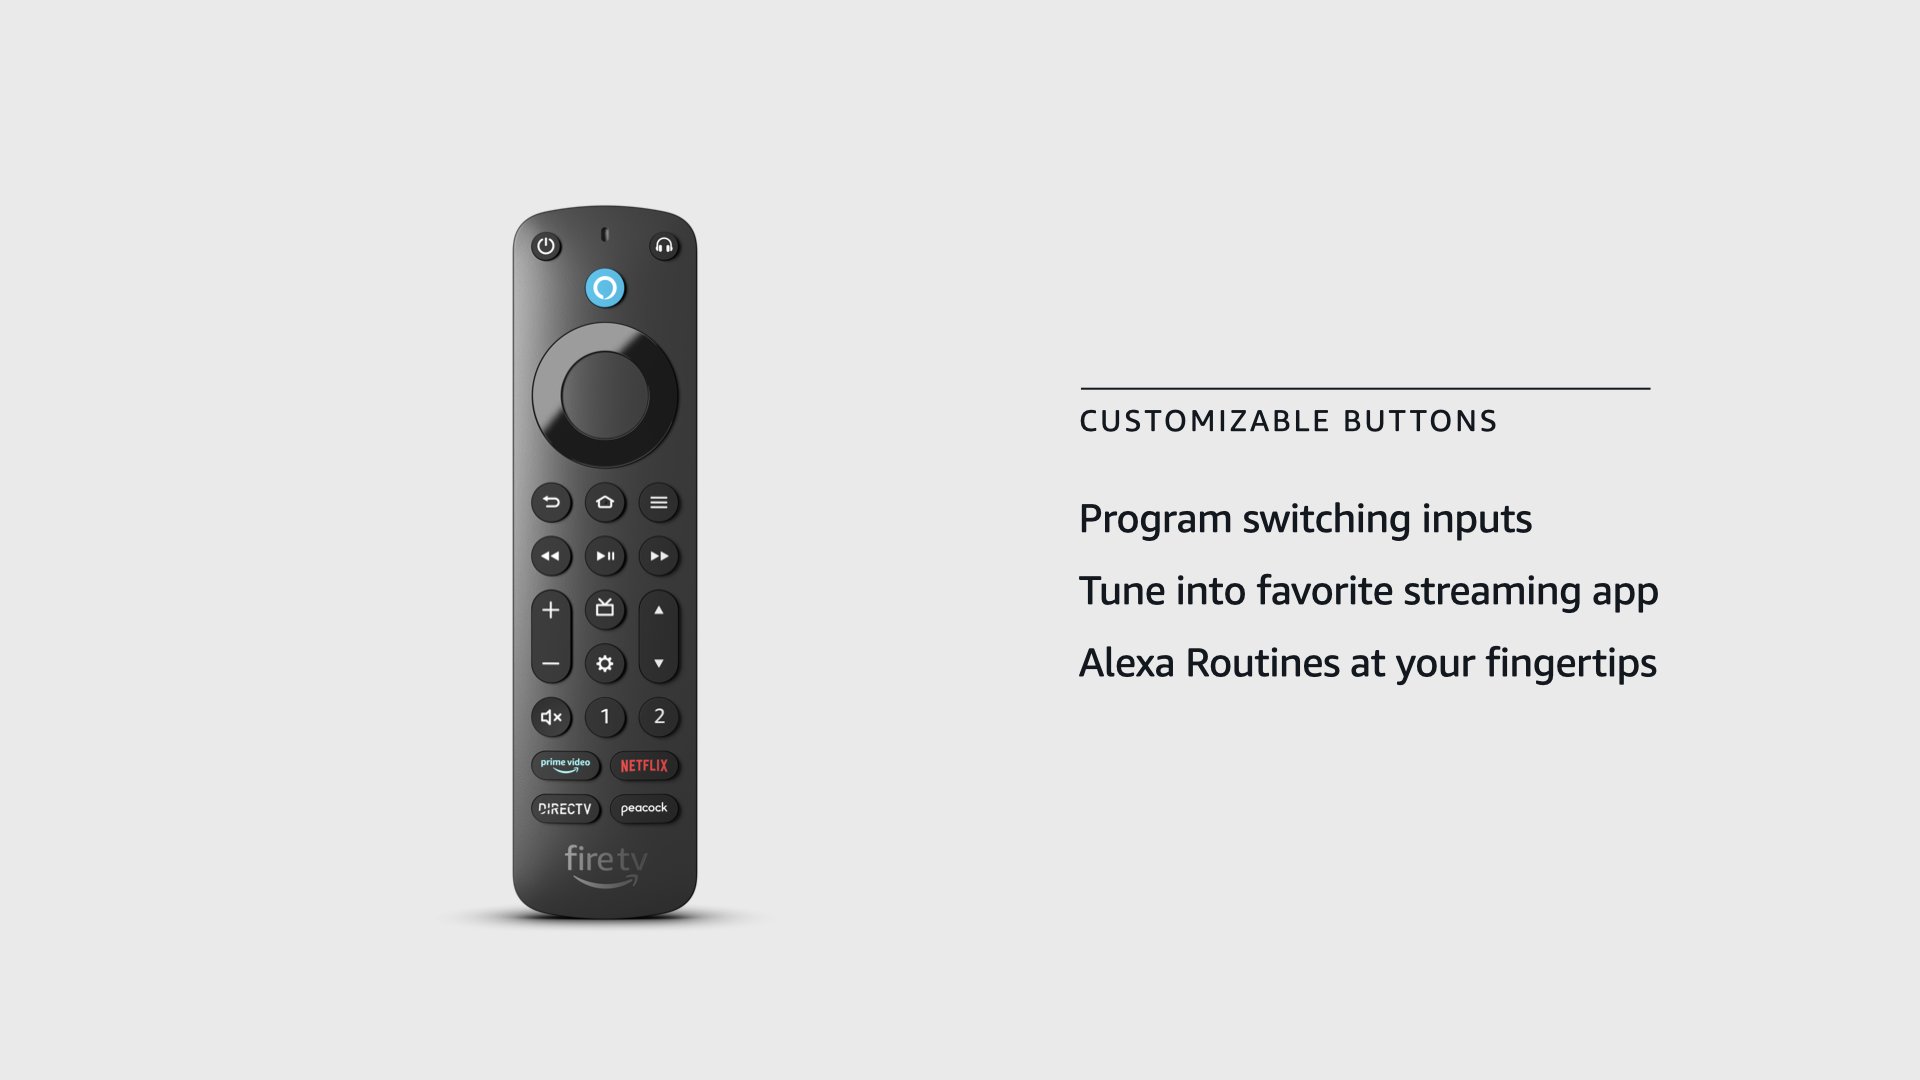 Amazon News on Twitter: "Meet Alexa Voice Remote Pro for @amazonfiretv. If  a customer misplaces it, they can say "Alexa, find my remote" and the  built-in speaker will ring. It also has